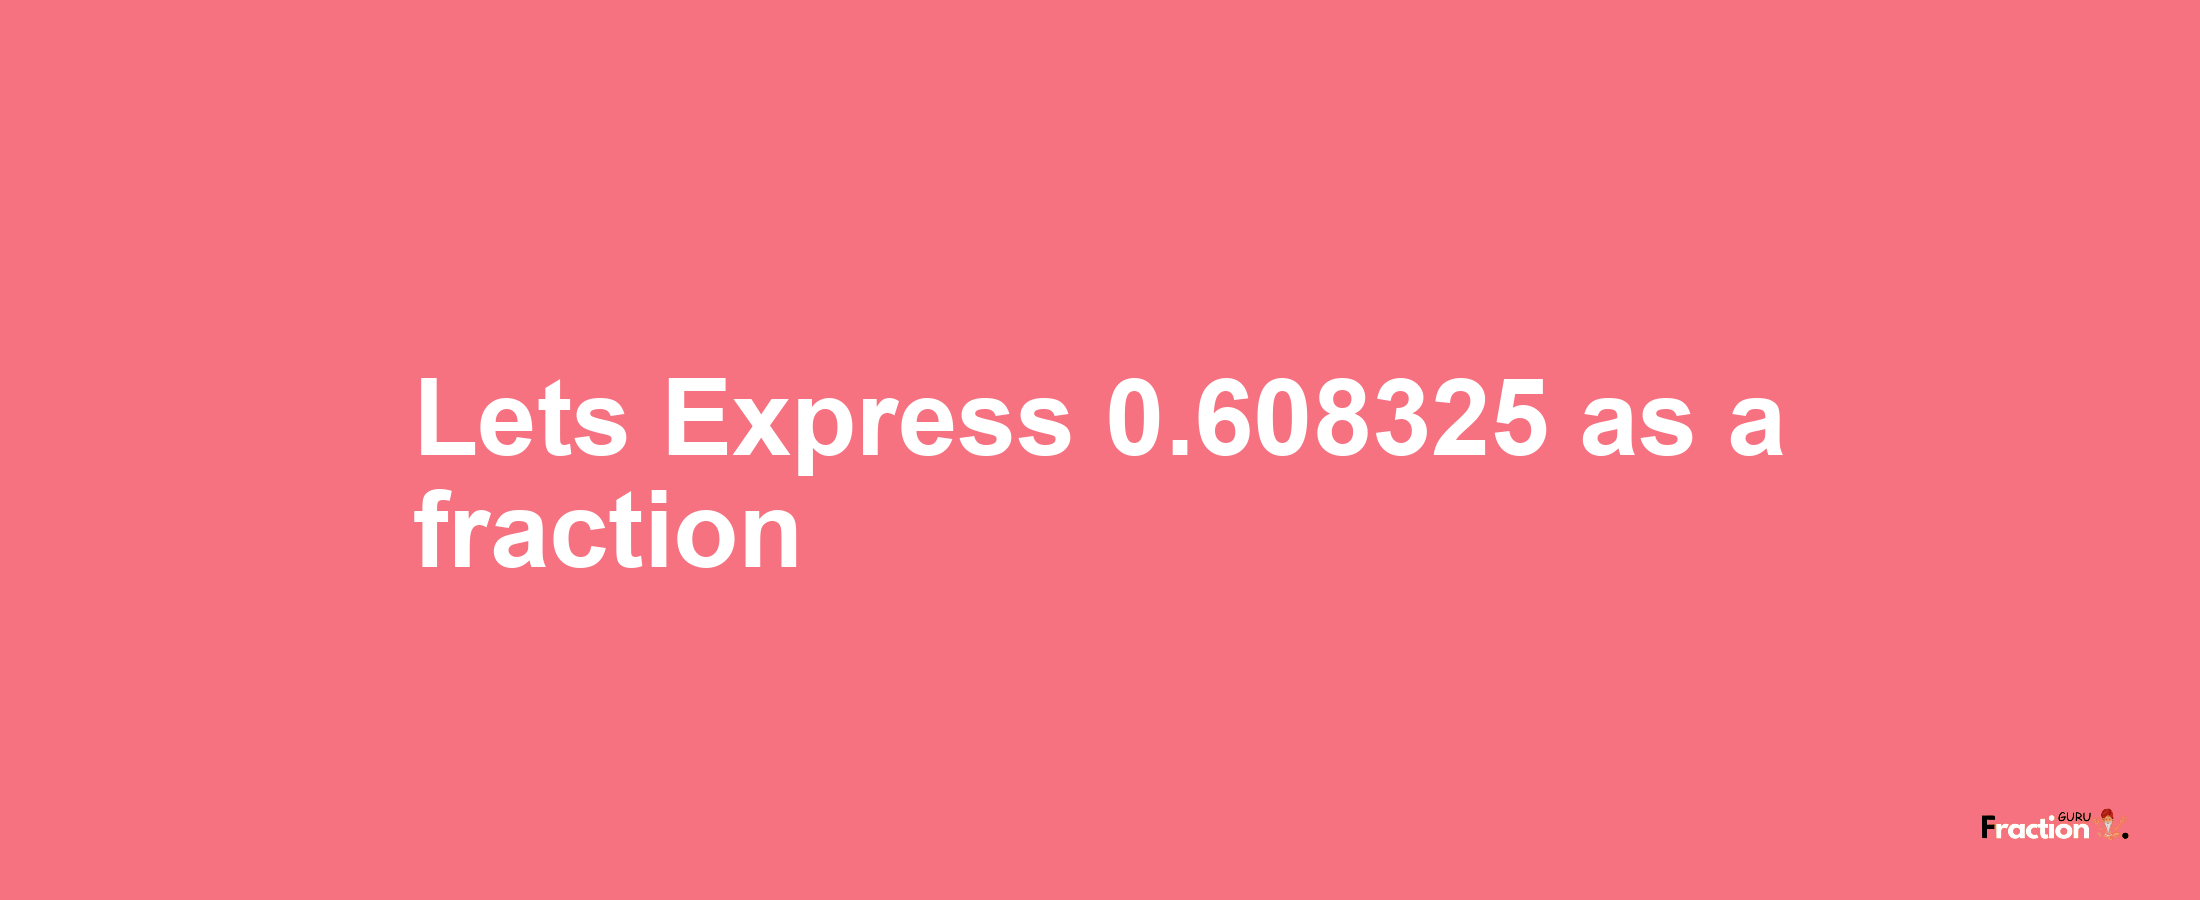 Lets Express 0.608325 as afraction